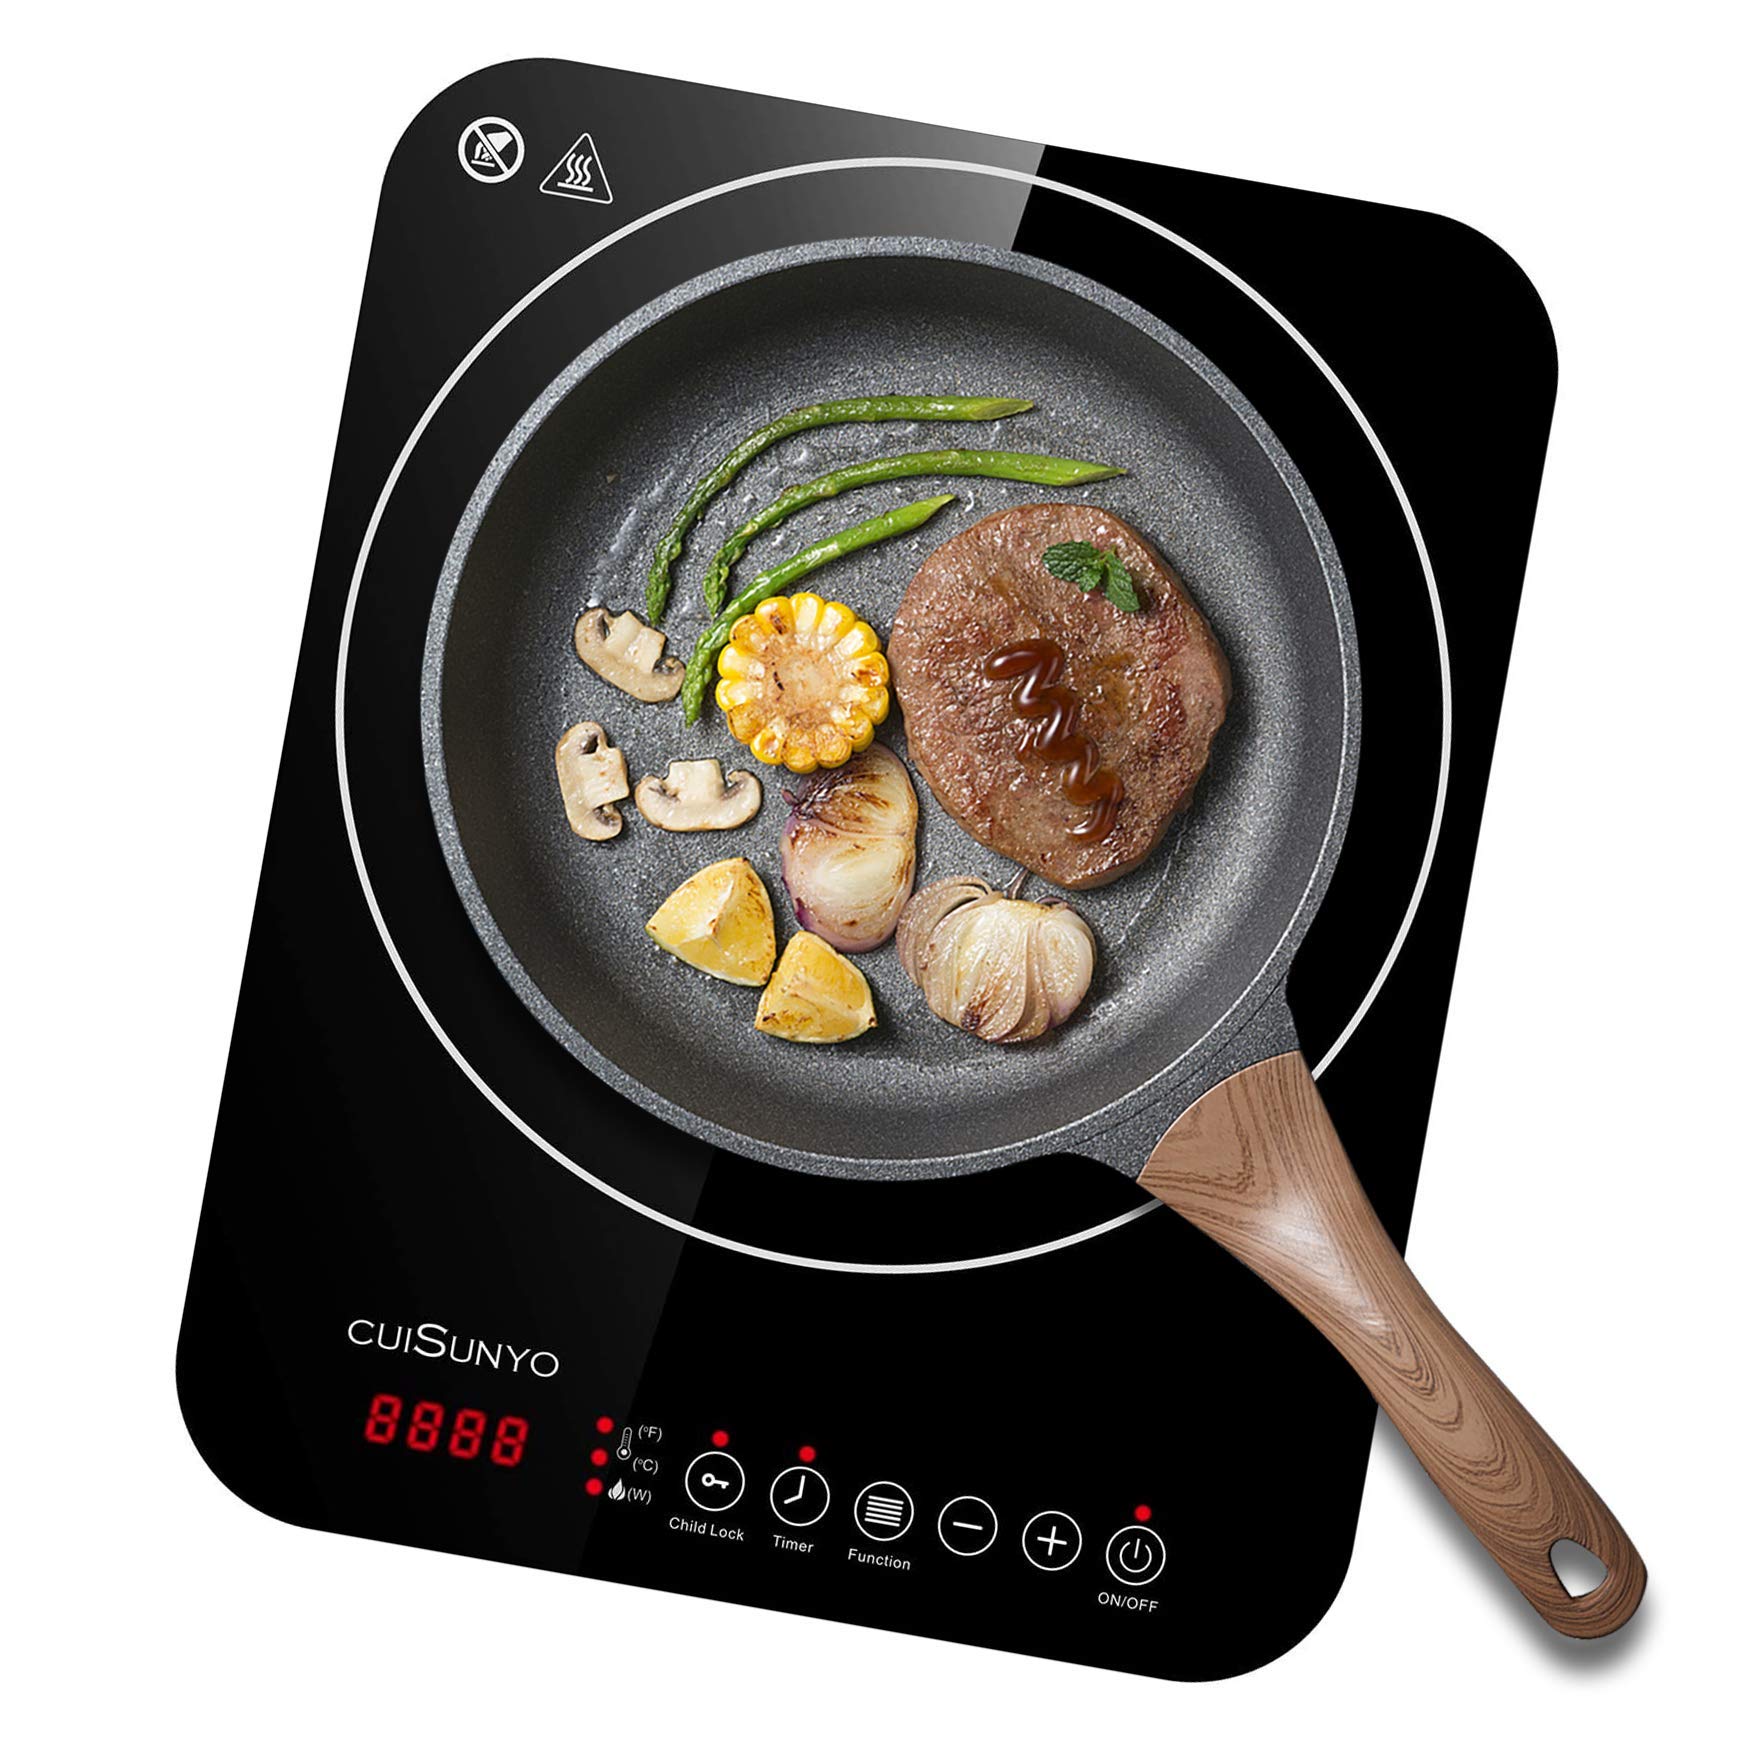 CUISUNYO Portable Induction Cooktop, 1800W Electric Stovetop Burner Top Price - FurnitureV.com